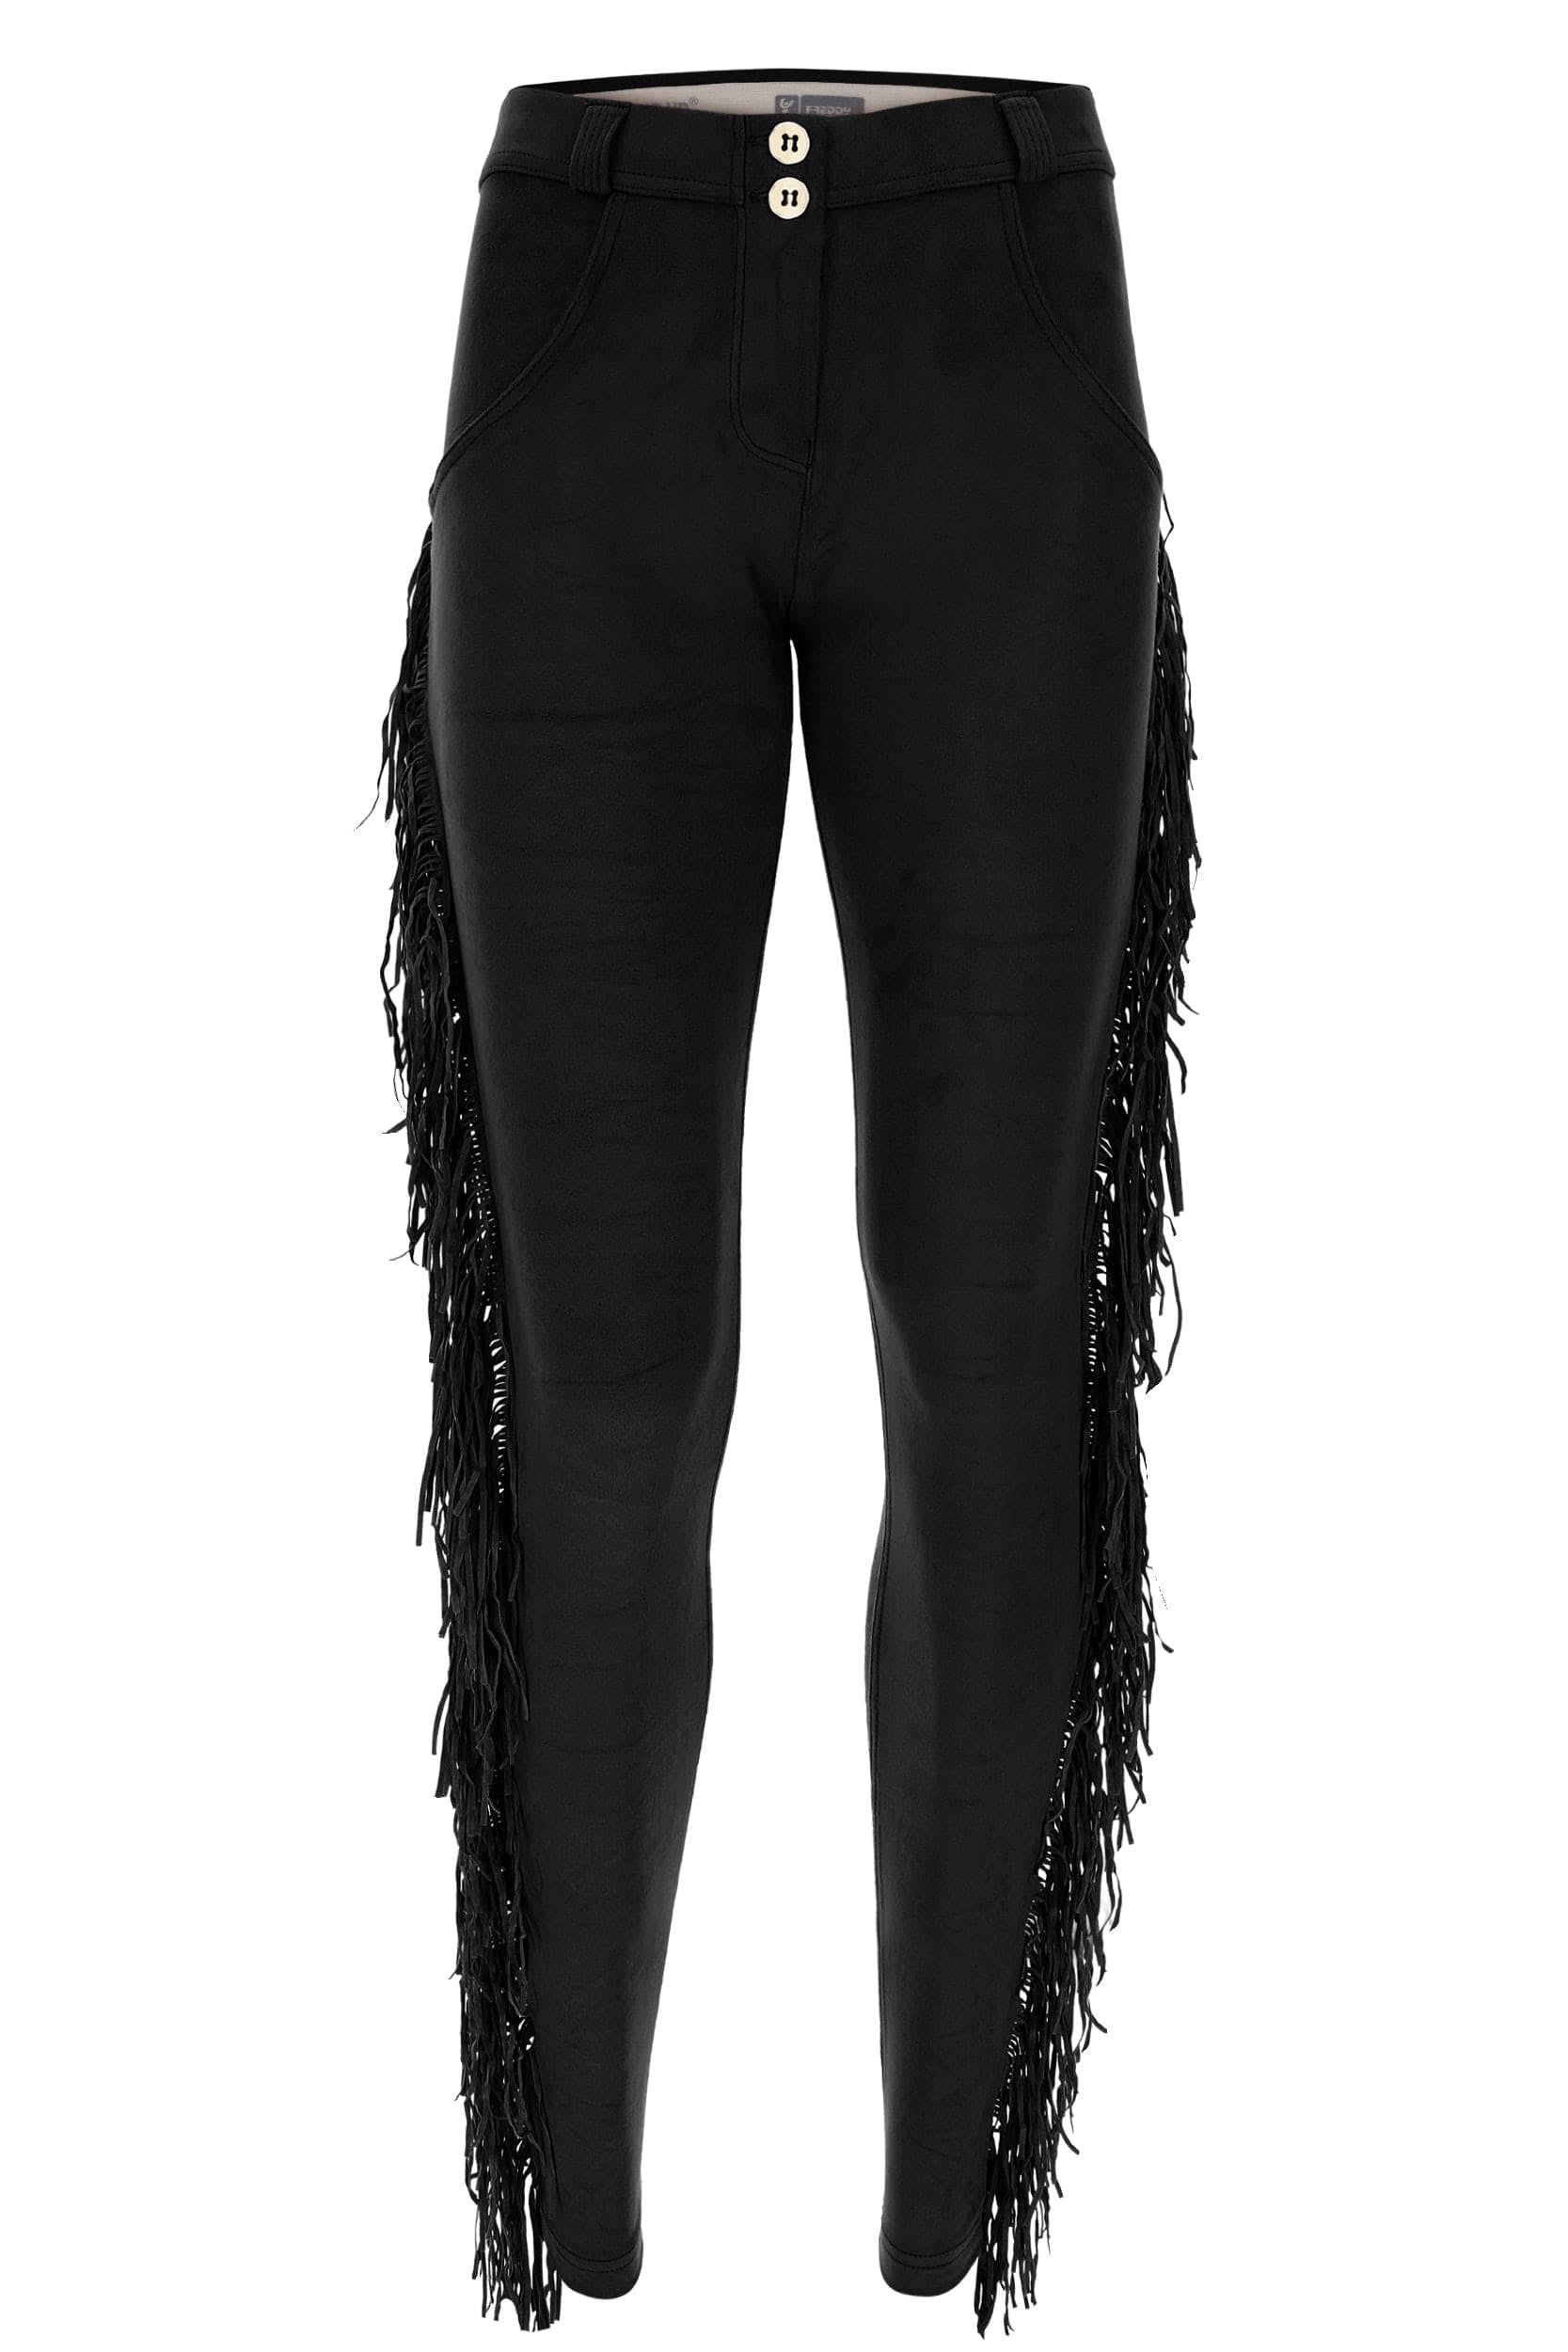 WR.UP® Suede Trousers with Fringe - Mid Rise - Full Length - Black 2